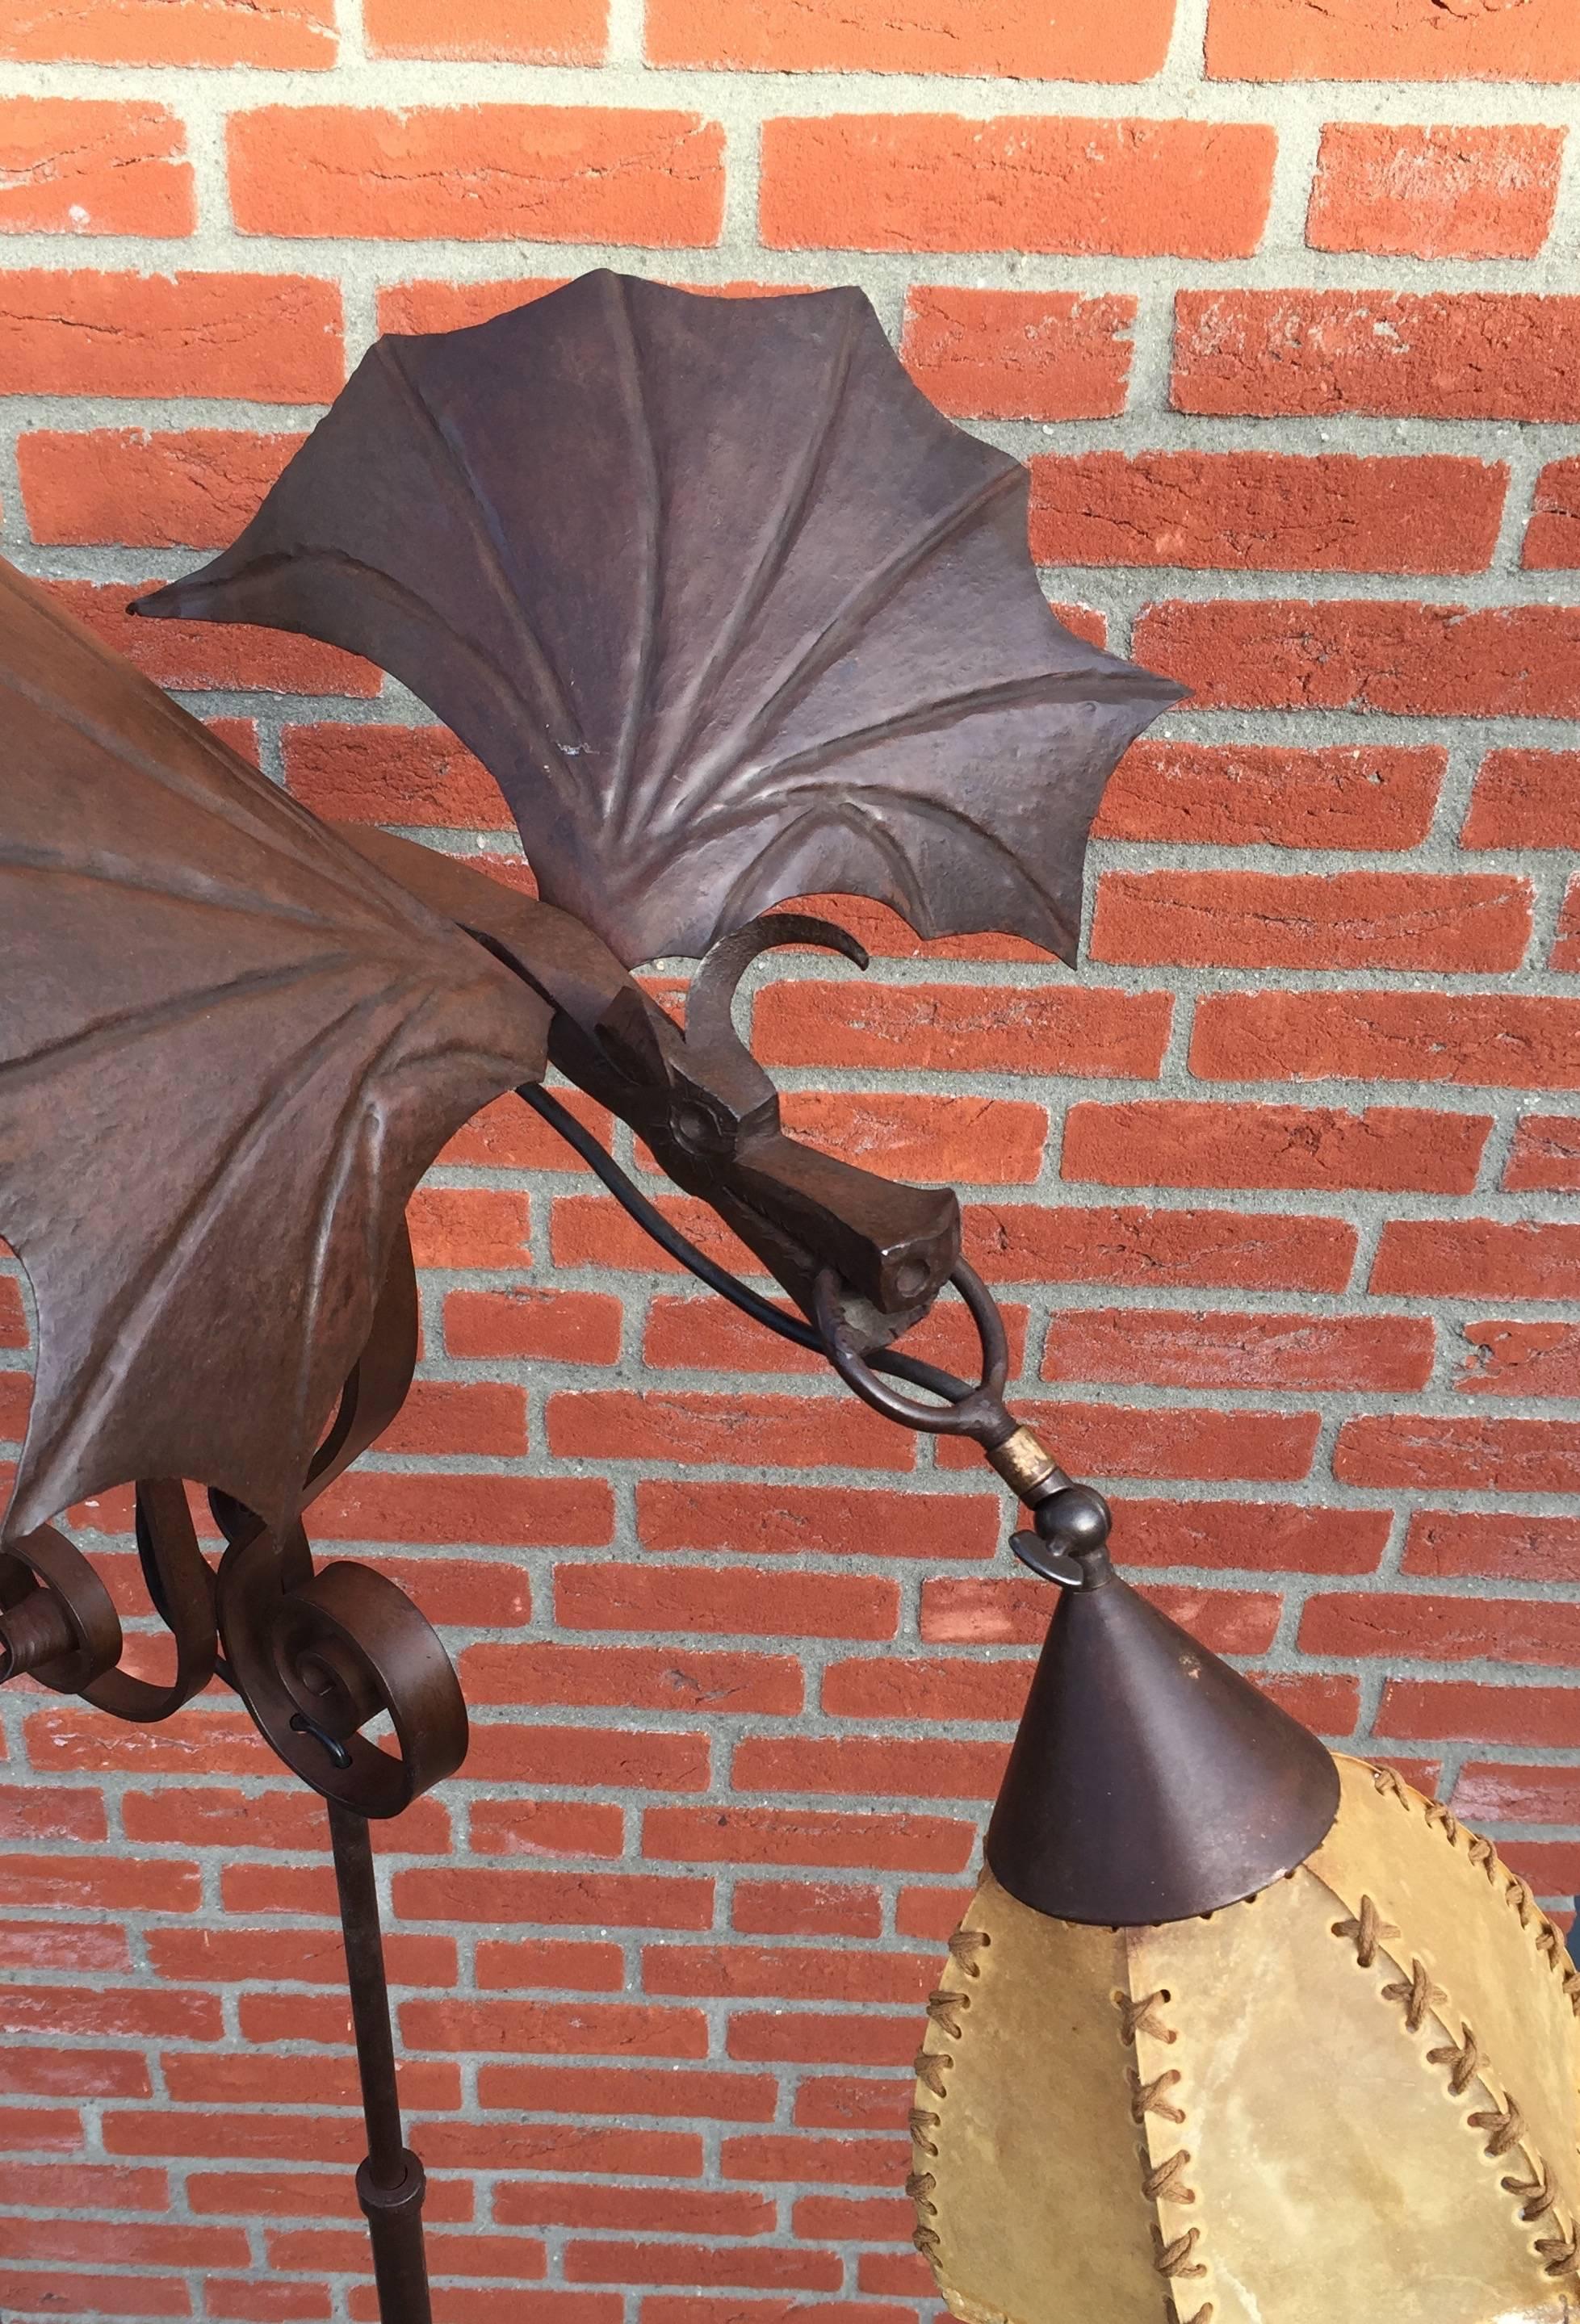 Forged Amazing Arts & Crafts Wrought Iron Winged and Flying Dragon Floor Lamp         